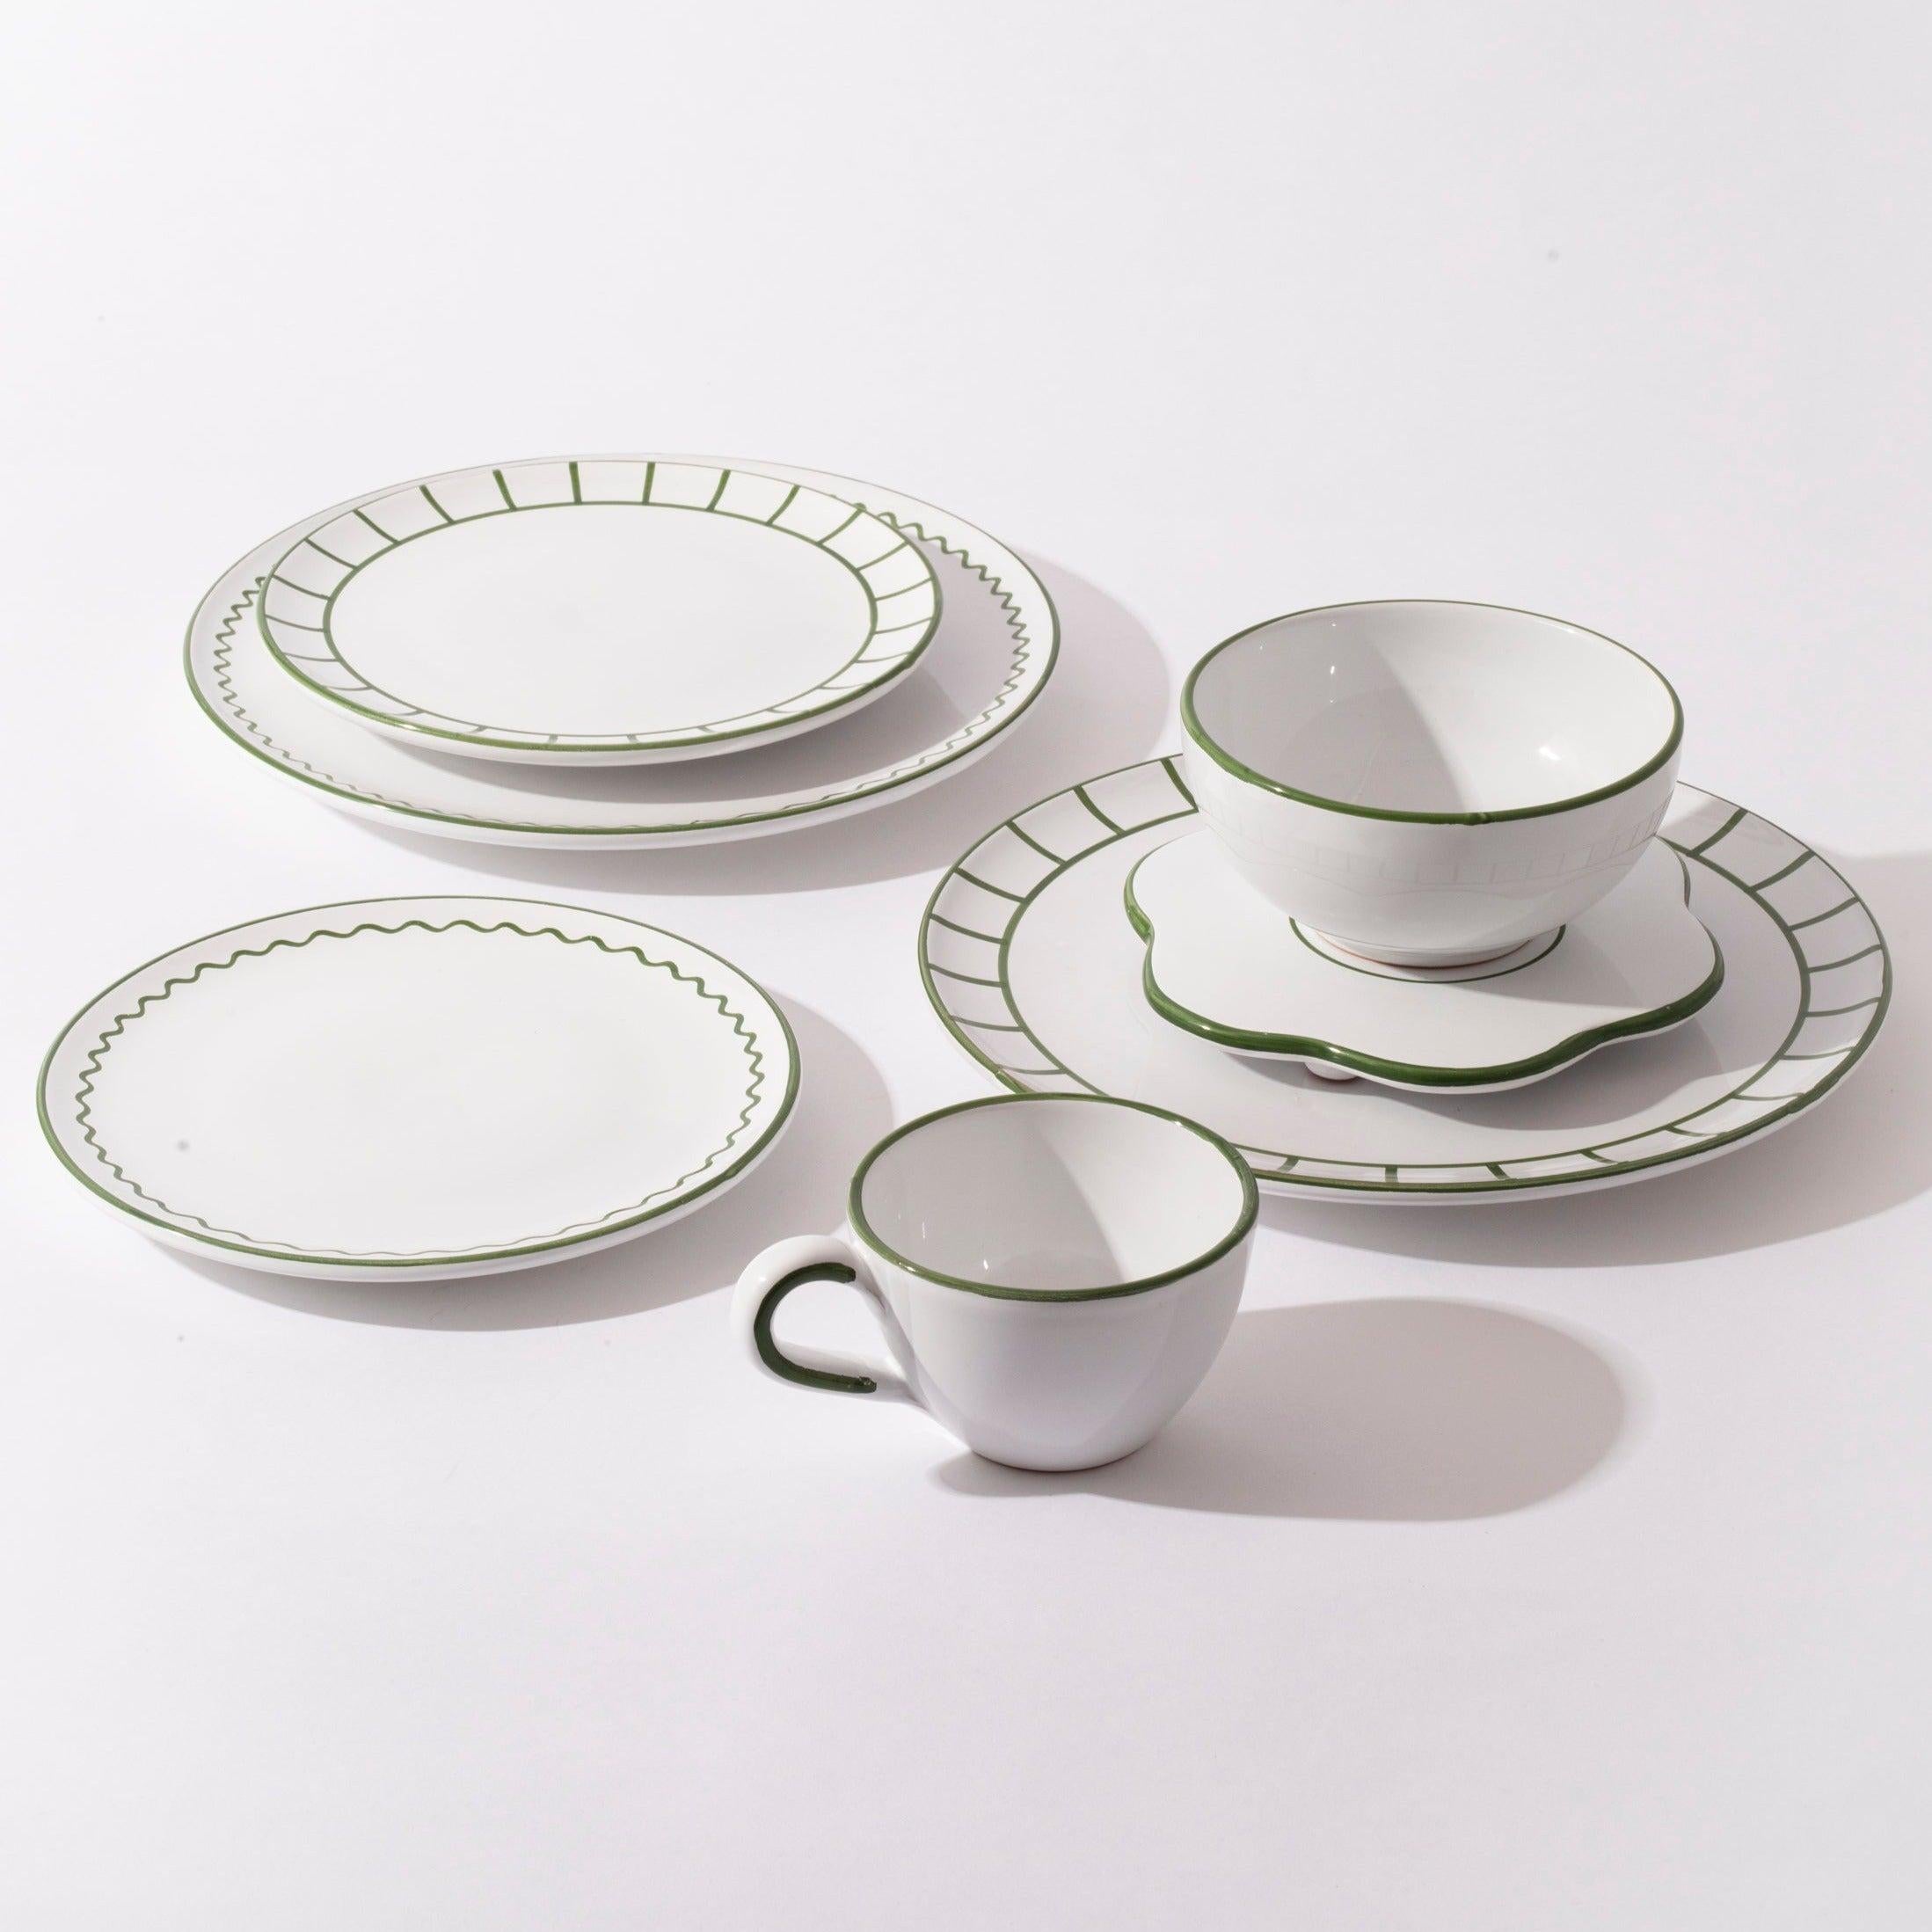 Jore Copenhagen bistro plates are part of the core bistro collection. 
The plate collection is available in 2 sizes and comes in 2 prints in 3 colors. All items can be mixed and matched between prints or colors, or used in sets. 


The lunch